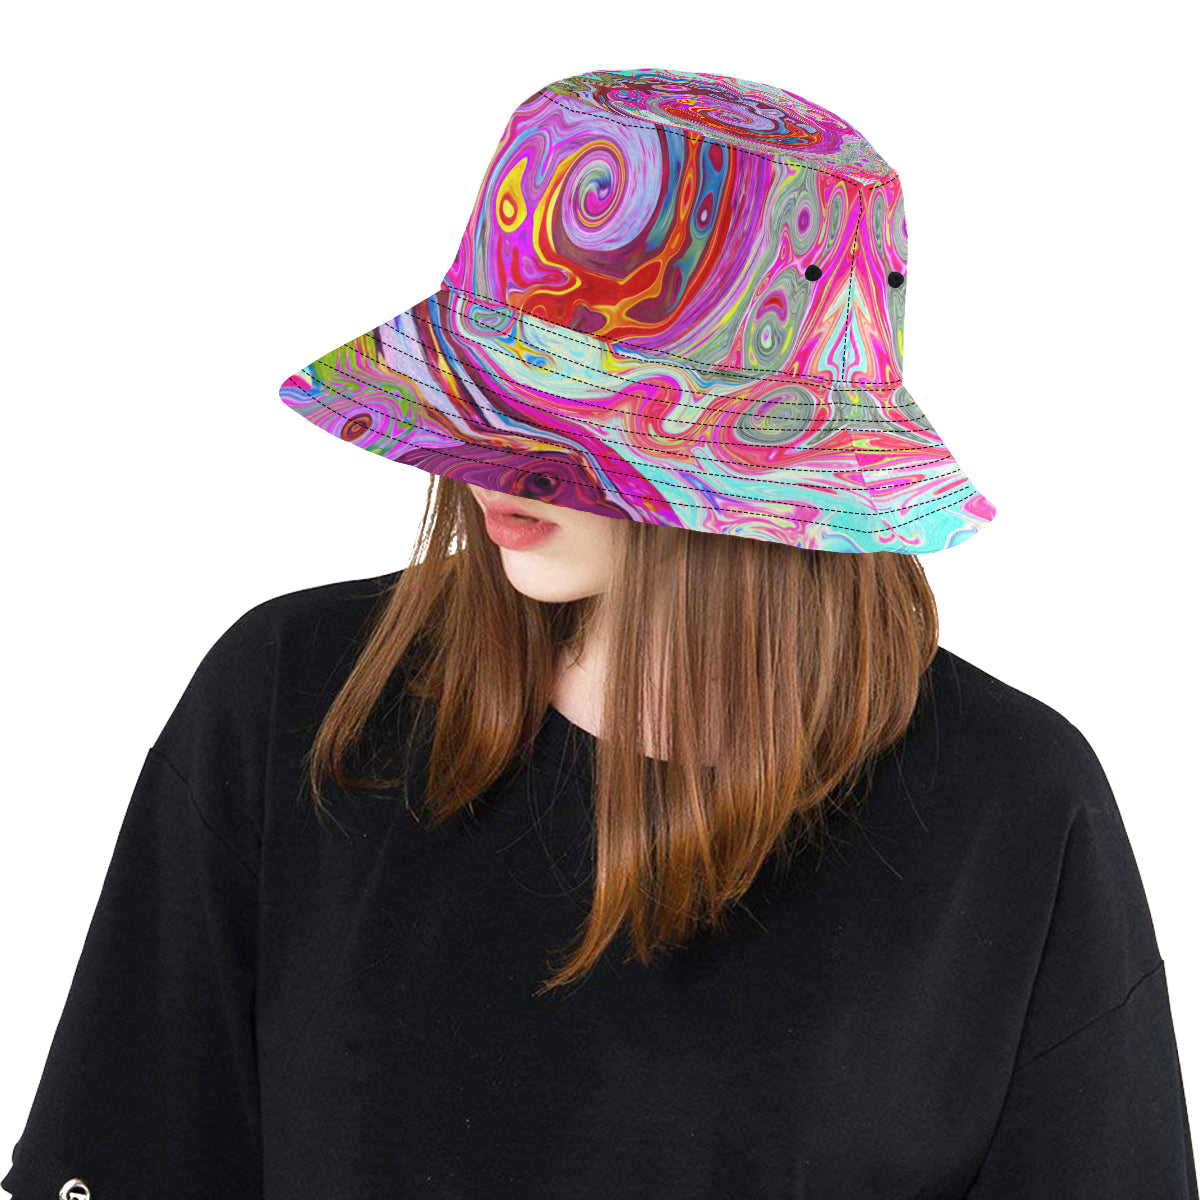 Bucket Hats, Groovy Abstract Retro Hot Pink and Blue Swirl